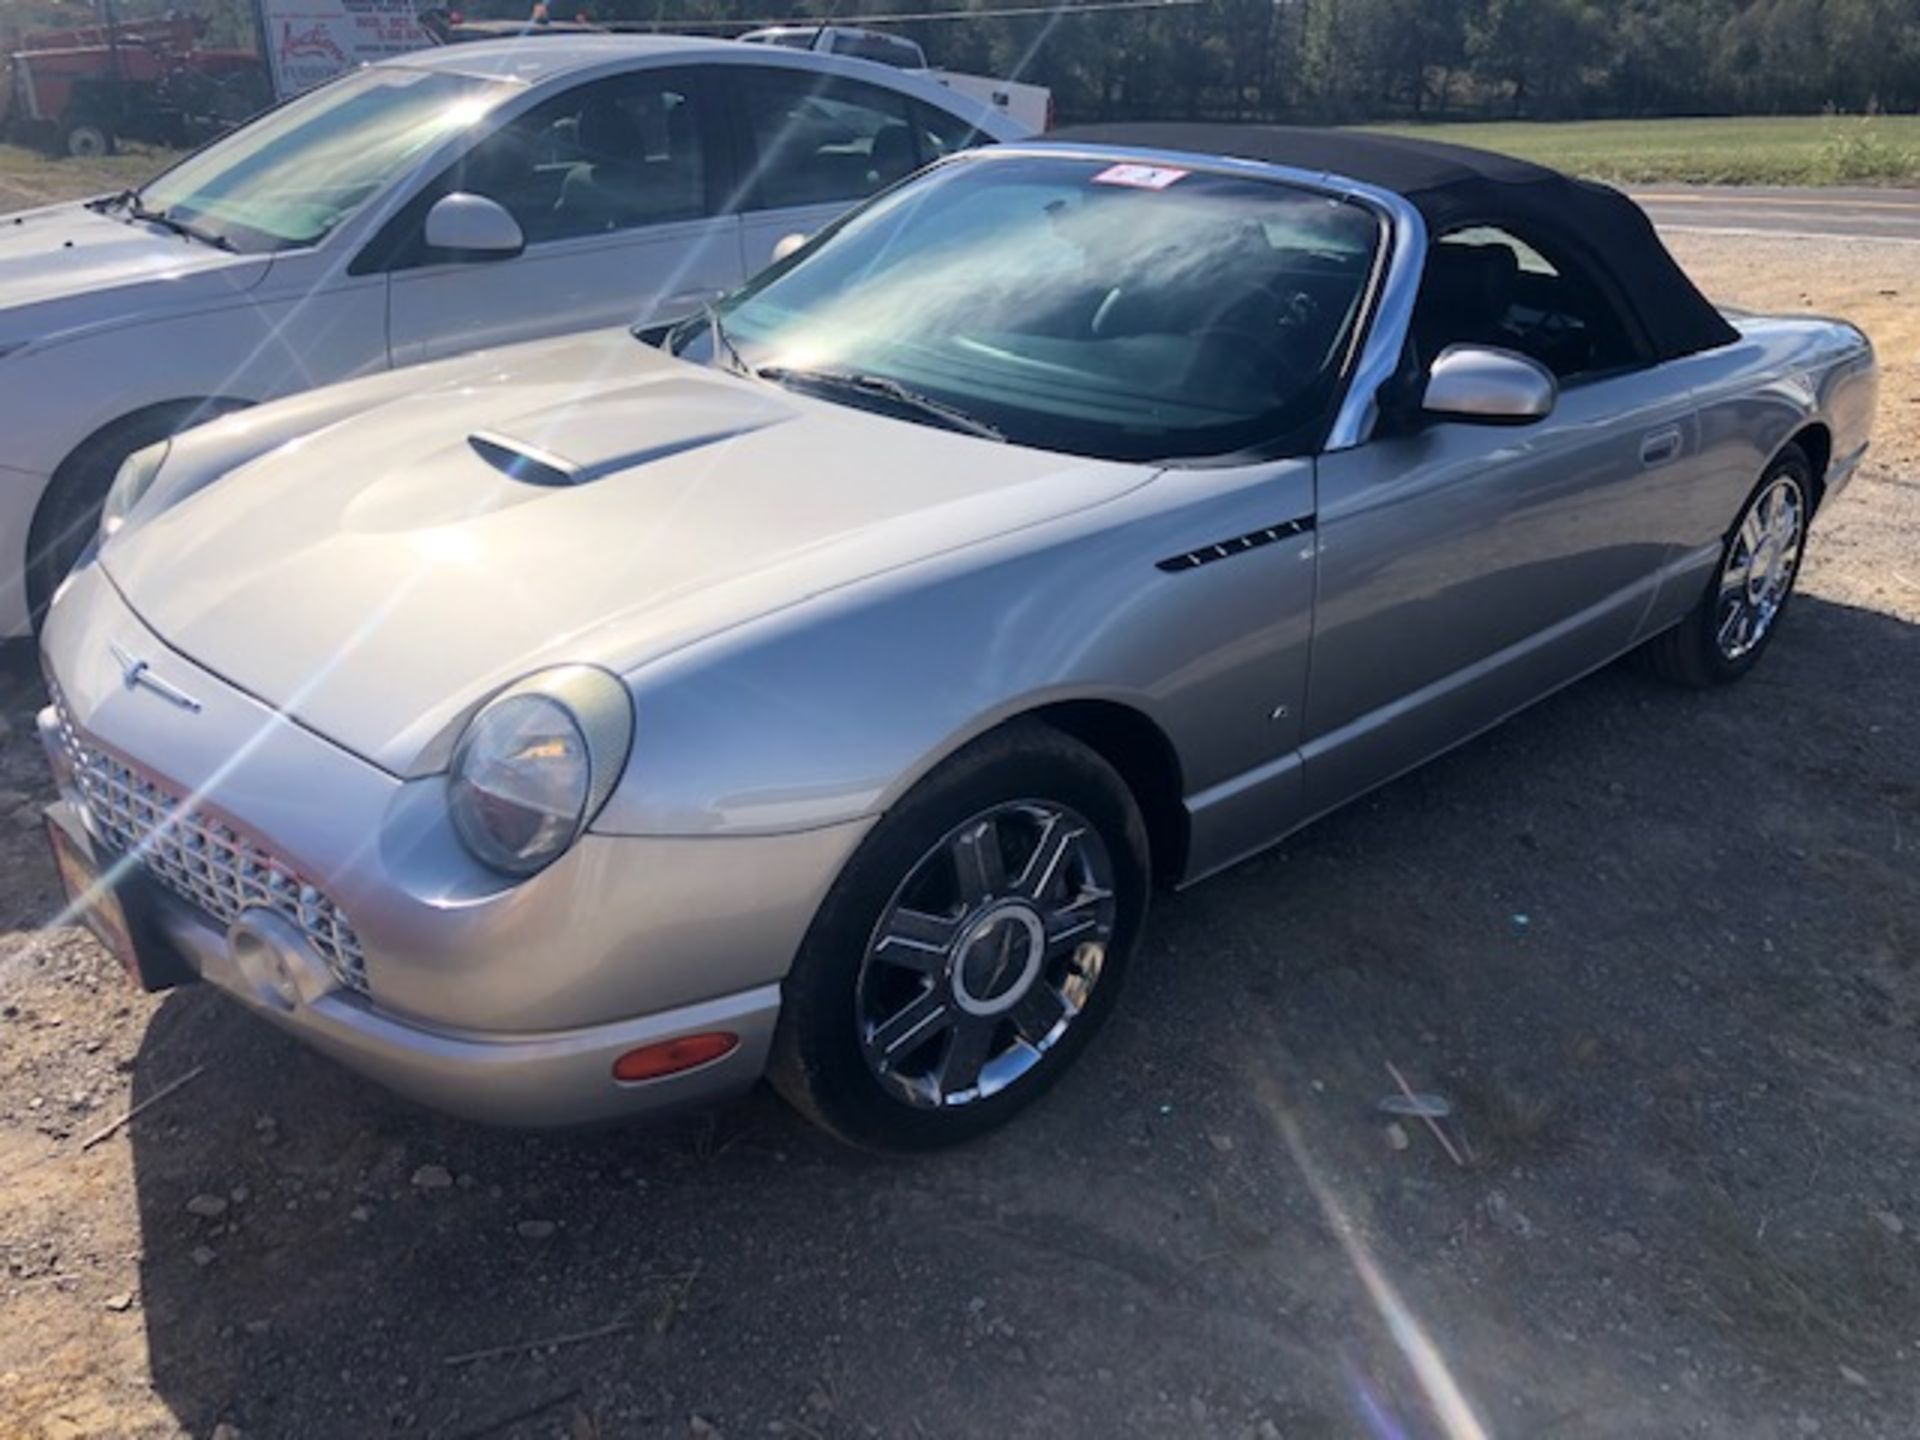 2004 Ford Thunderbird, V-8 Automatic, Leather Interior, ODO 149,380 Vin 1FAHP60A04Y100896 Title - Image 2 of 2